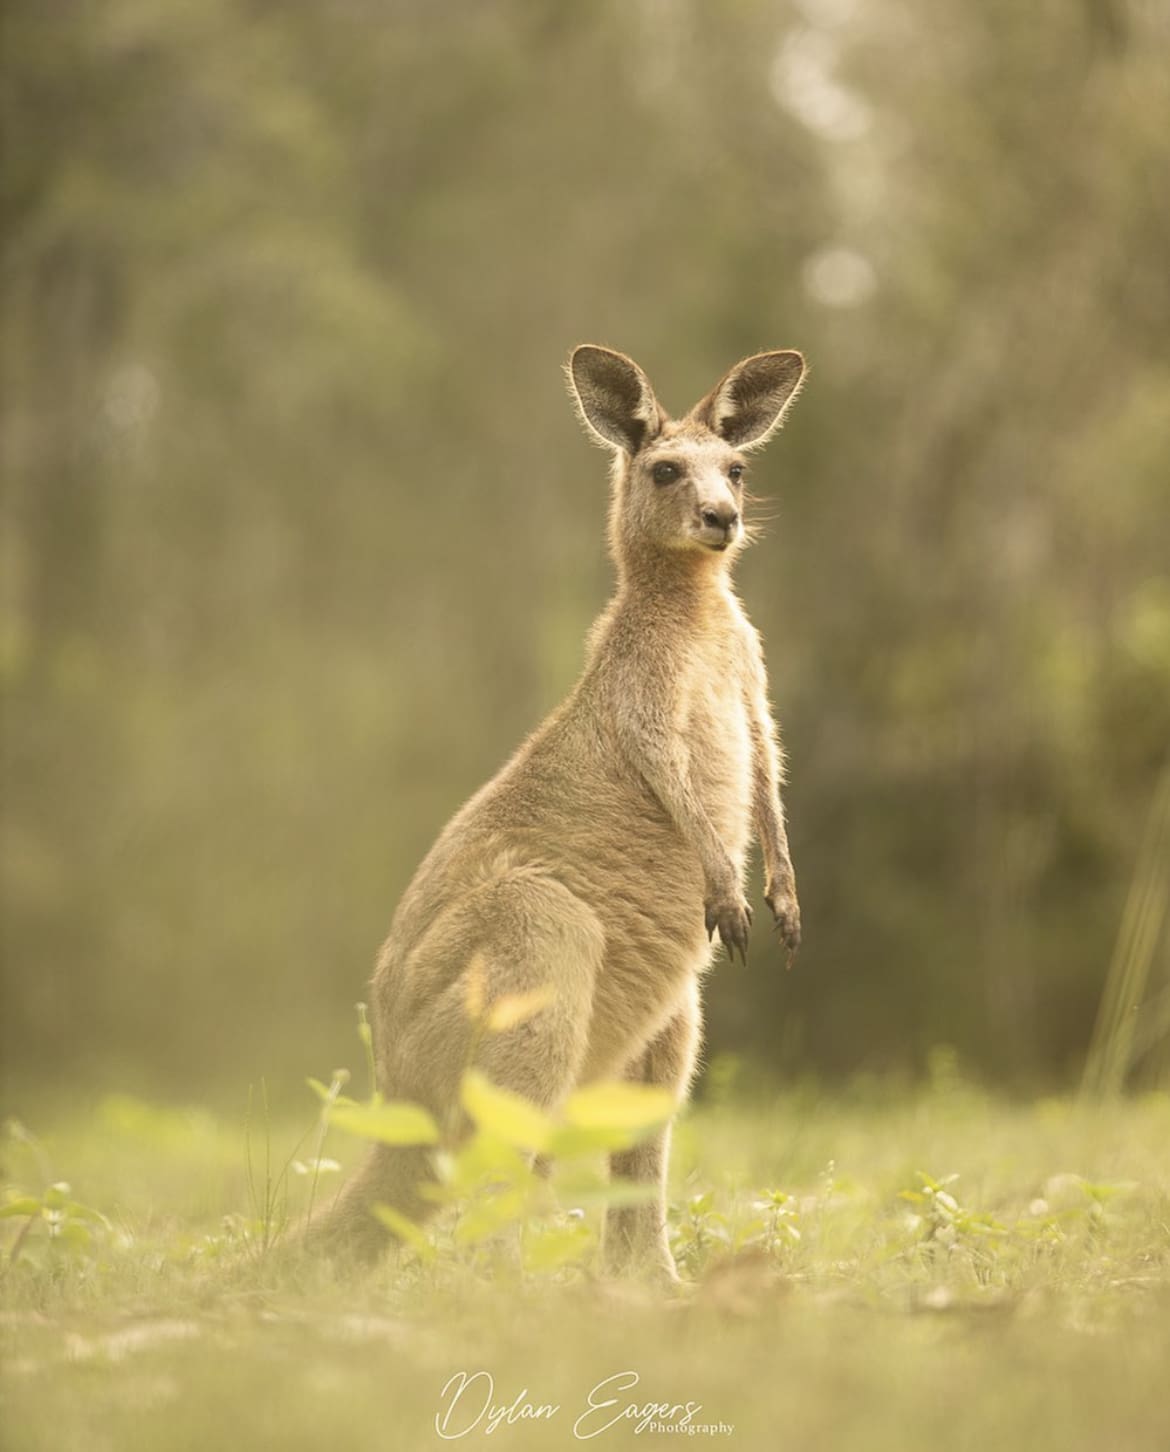 Kangaroo in Coombabah National Park